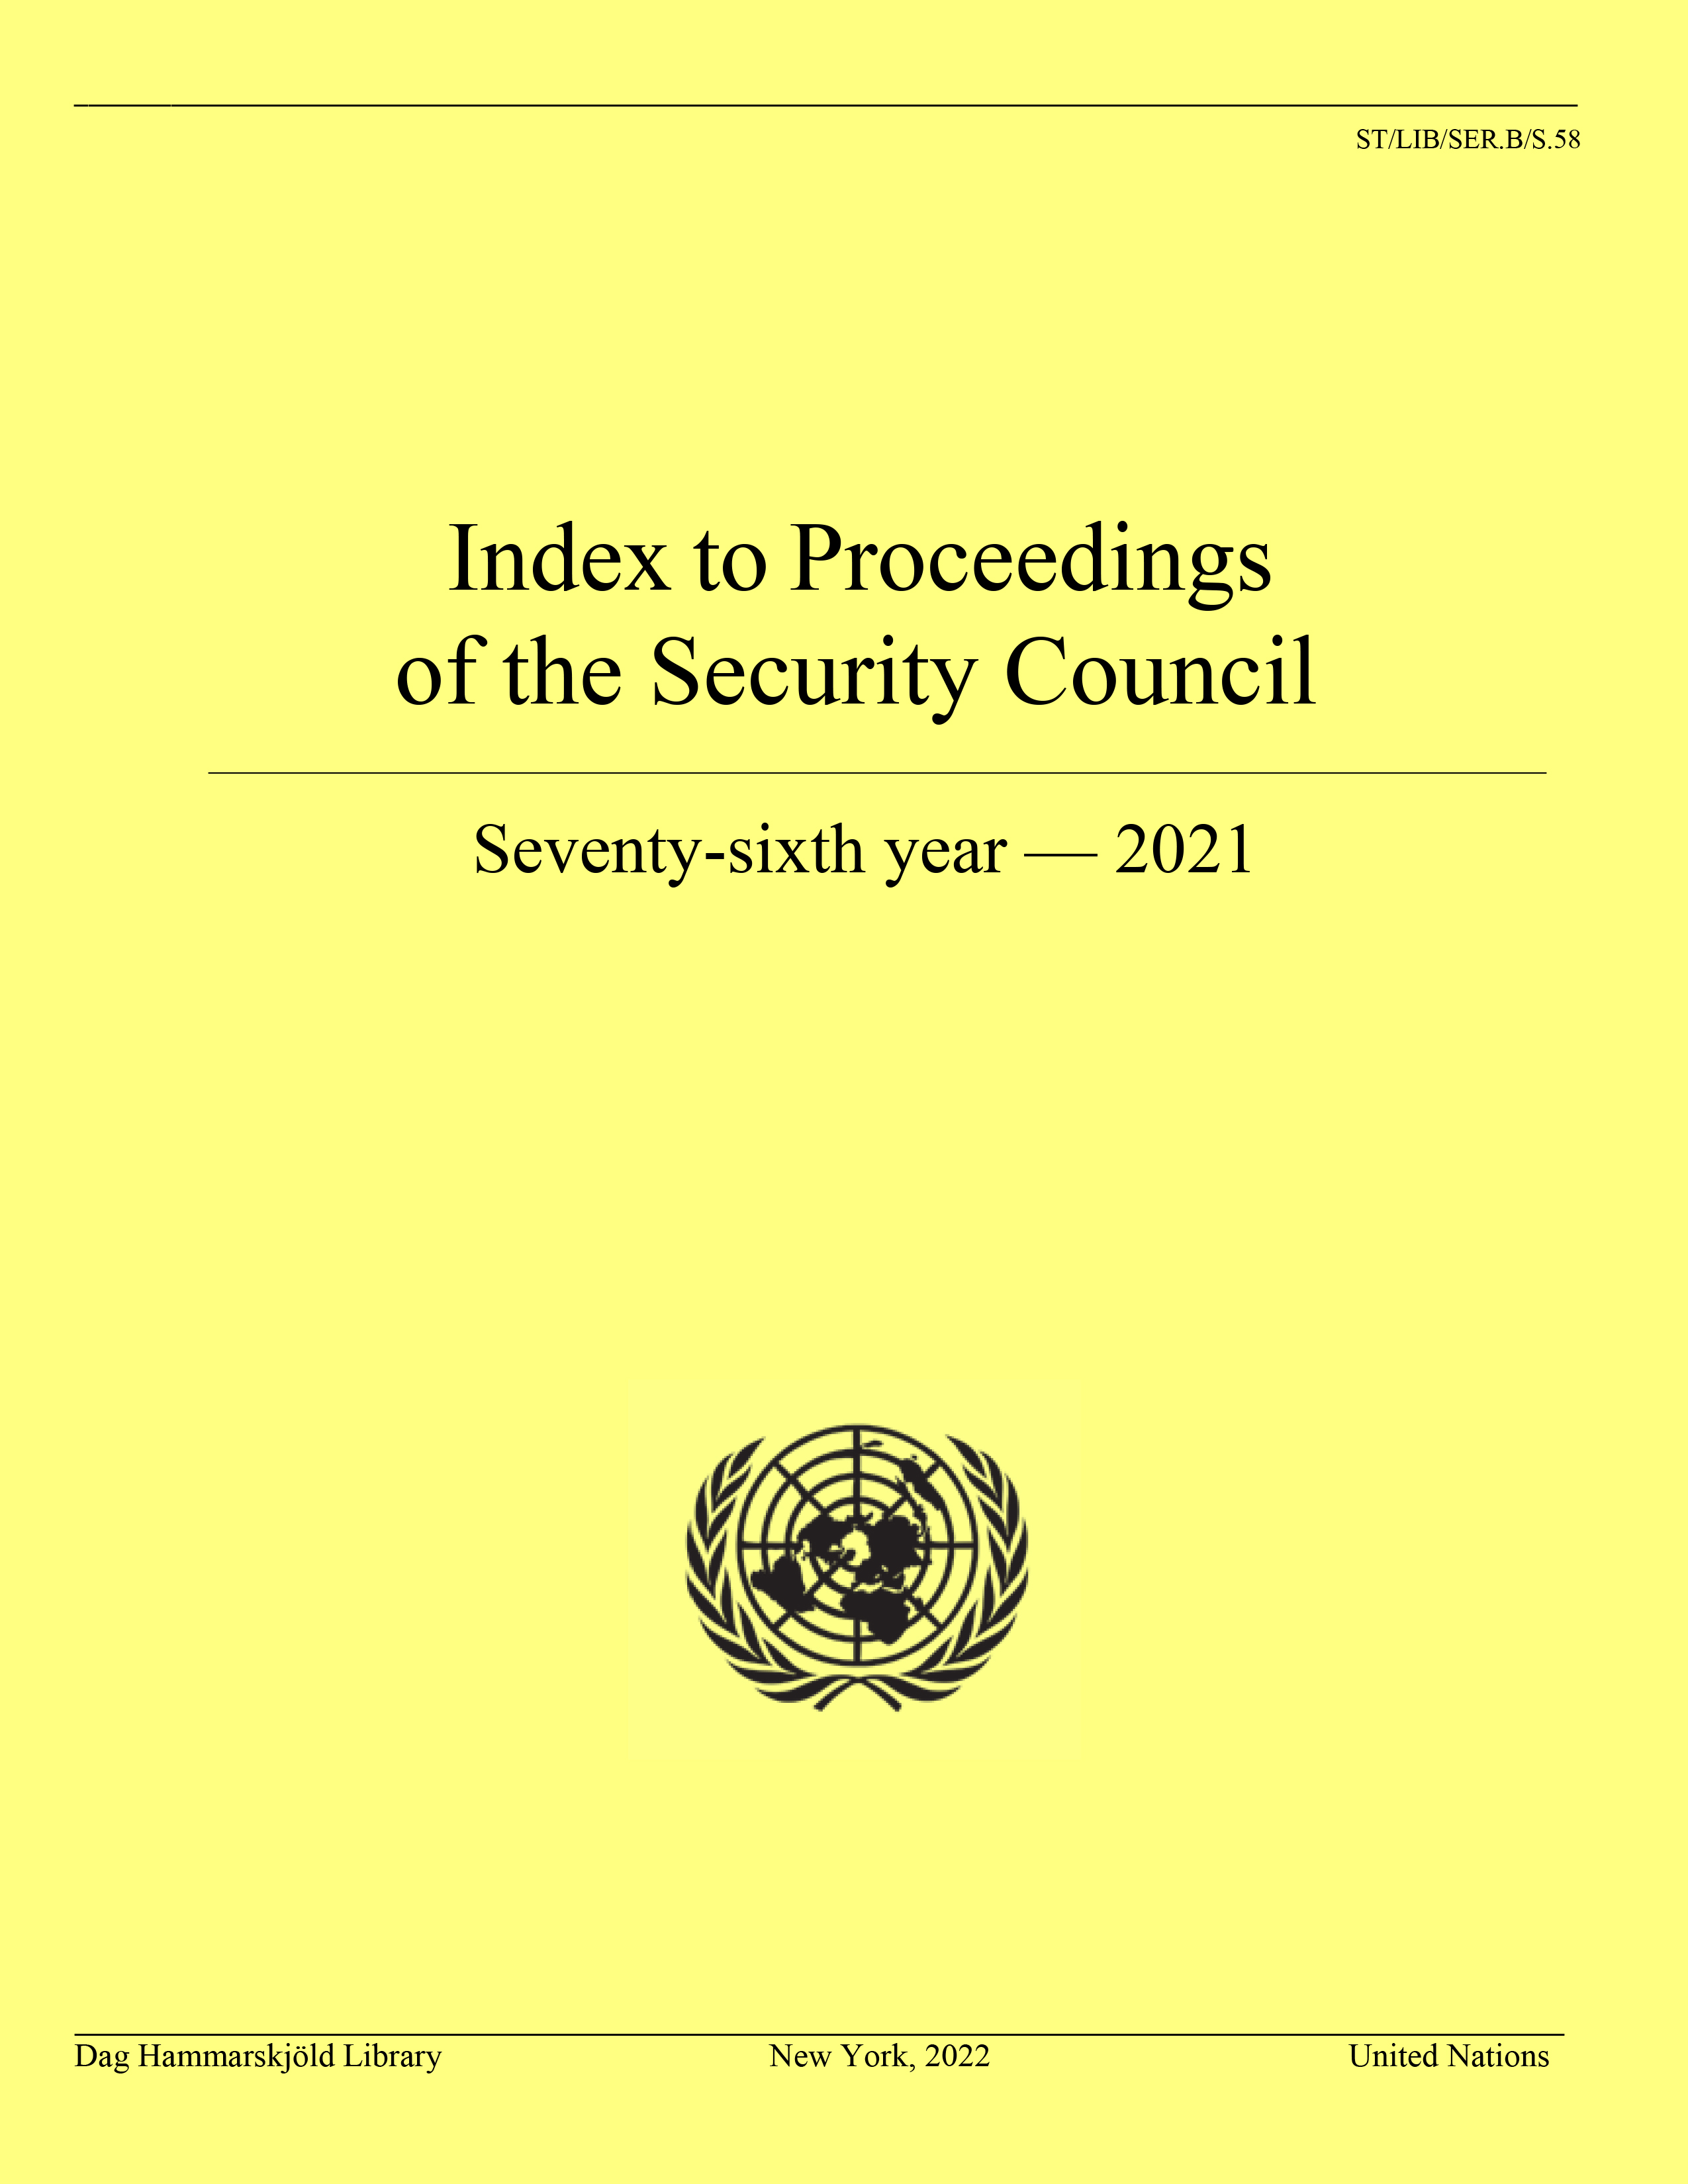 image of Index to Proceedings of the Security Council: Seventy-sixth Year, 2021